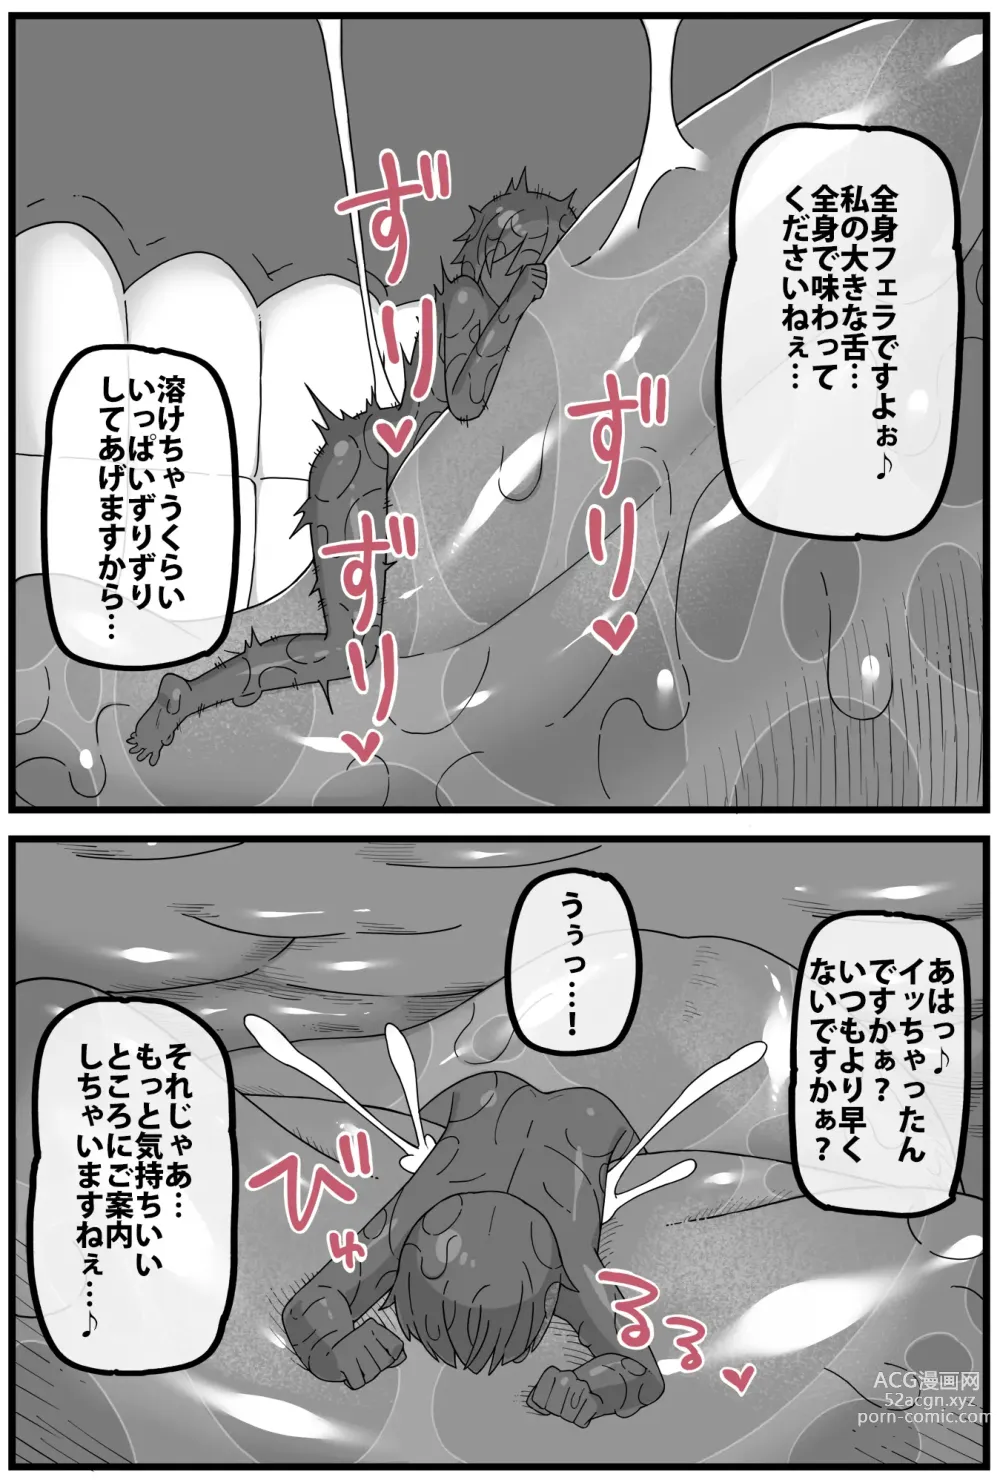 Page 3 of doujinshi Short cartoon about a brothel that swallows whole